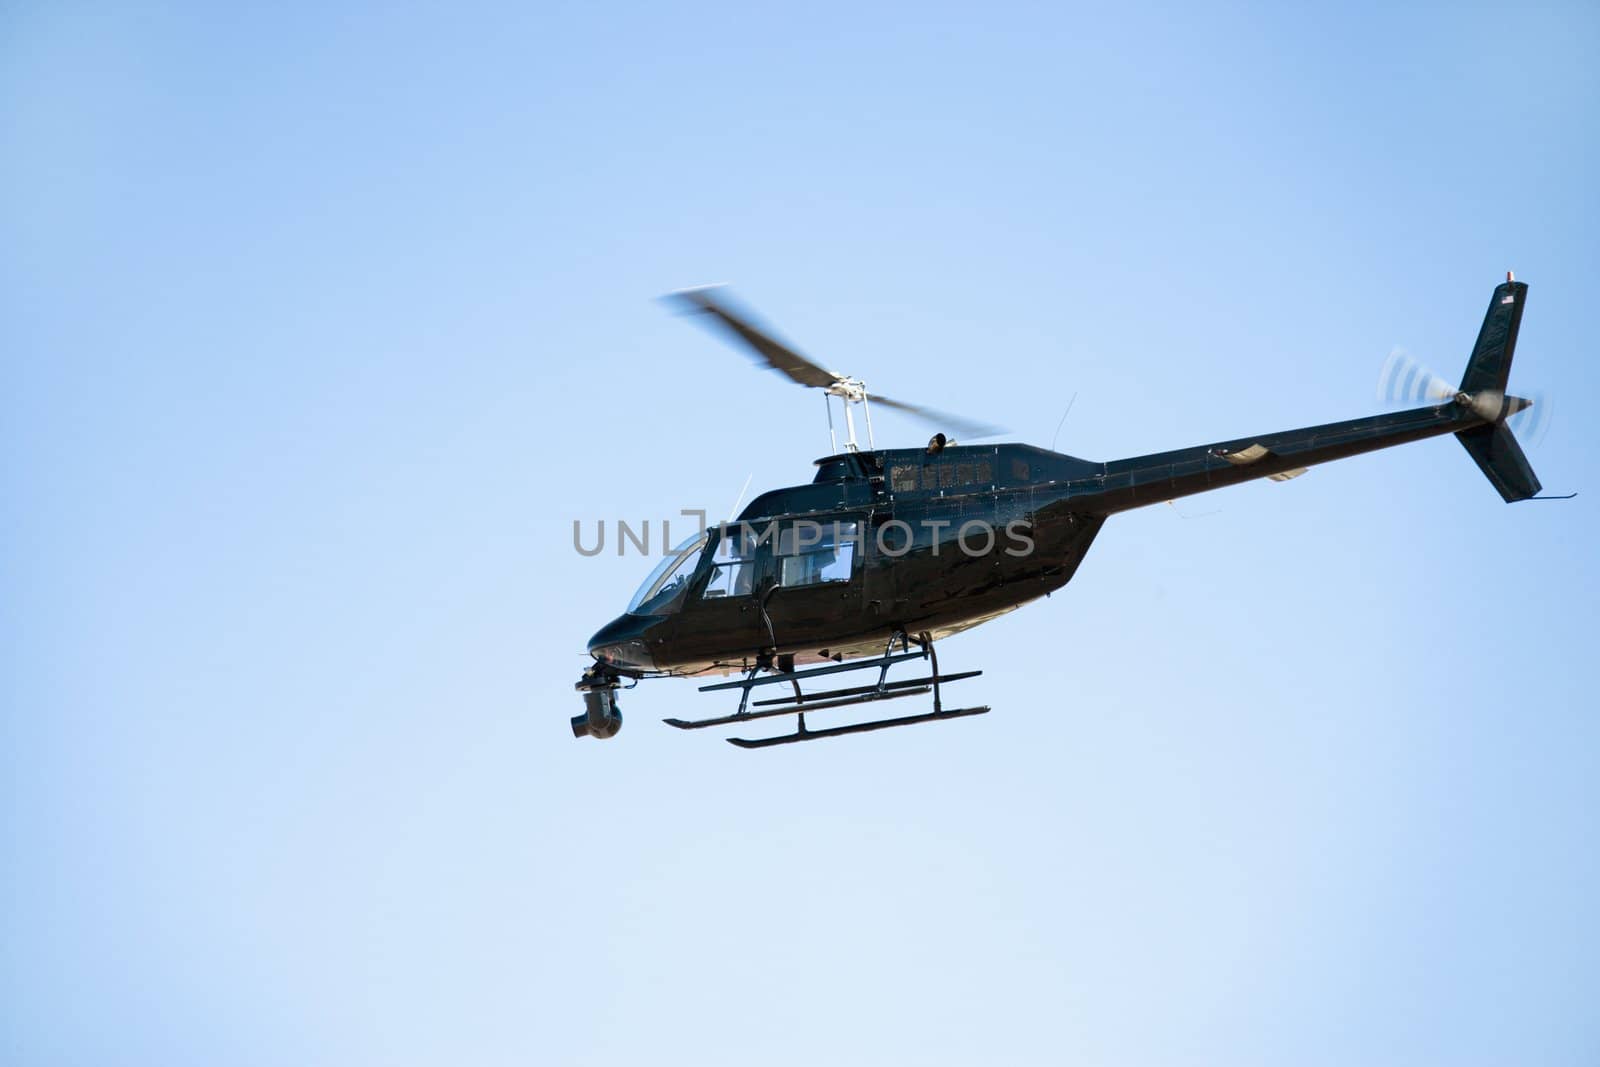 Low angle shot of helicopter flying through blue sky.